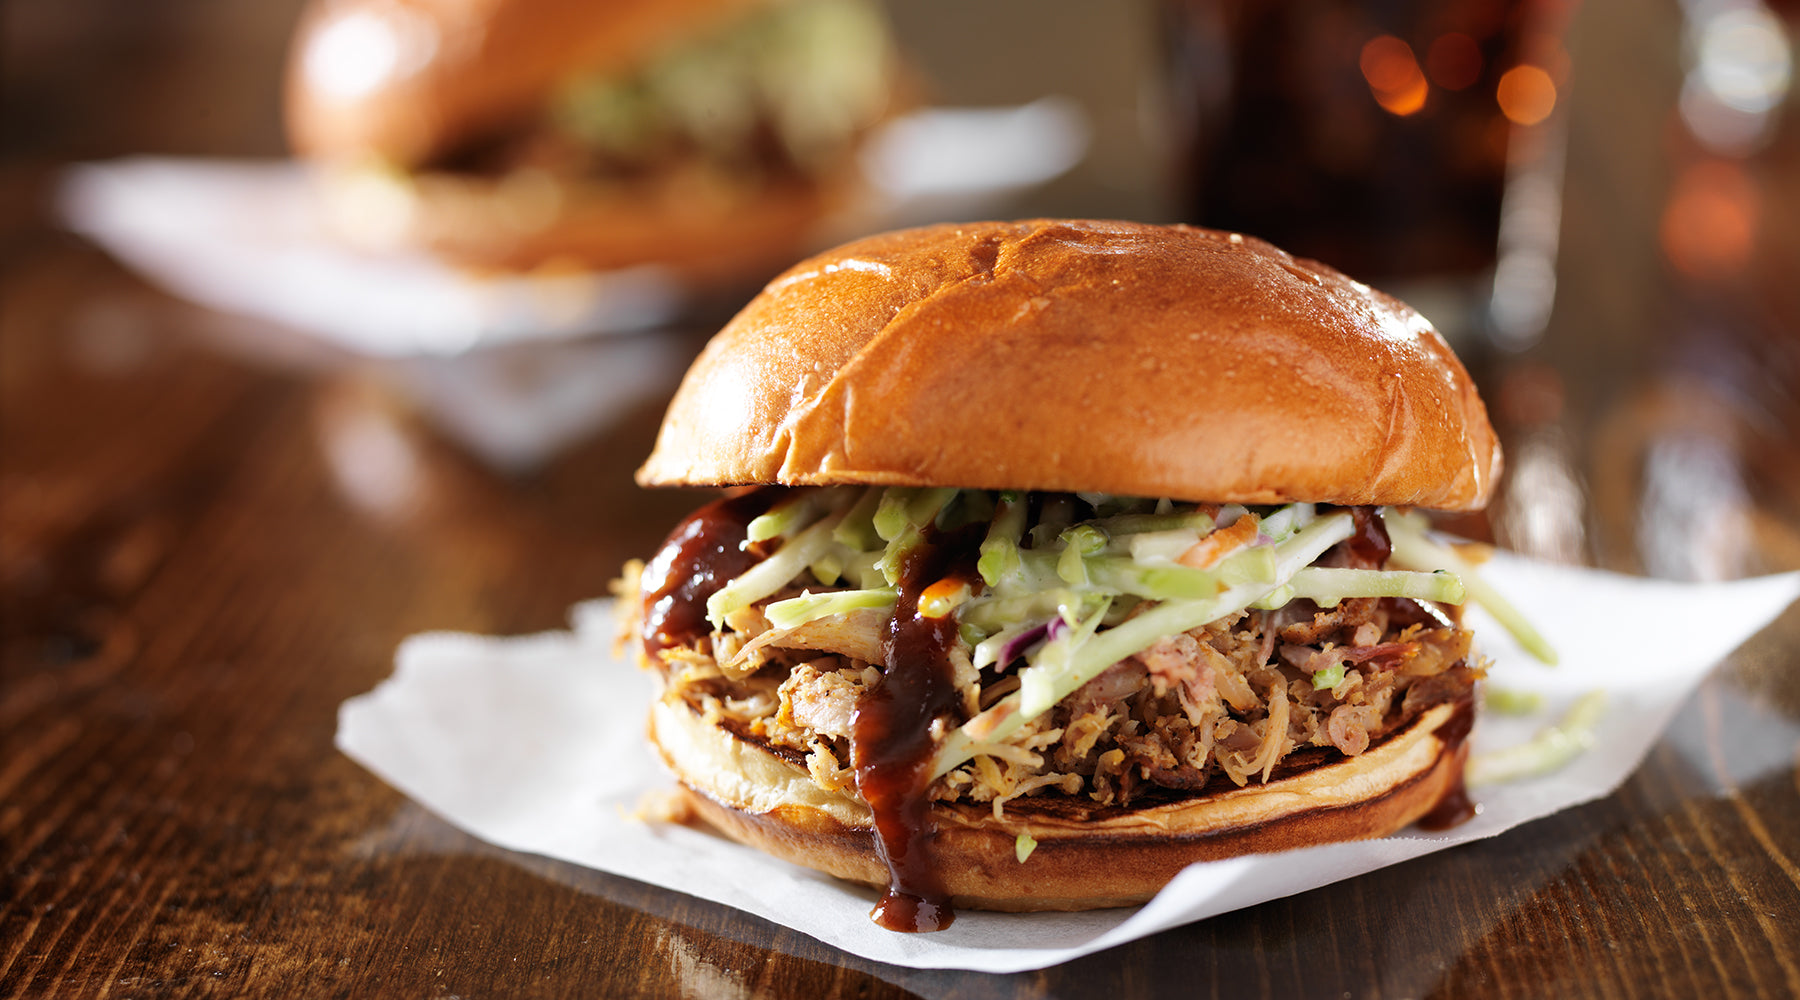 Pulled pork topped with apple slaw in a sandwich 